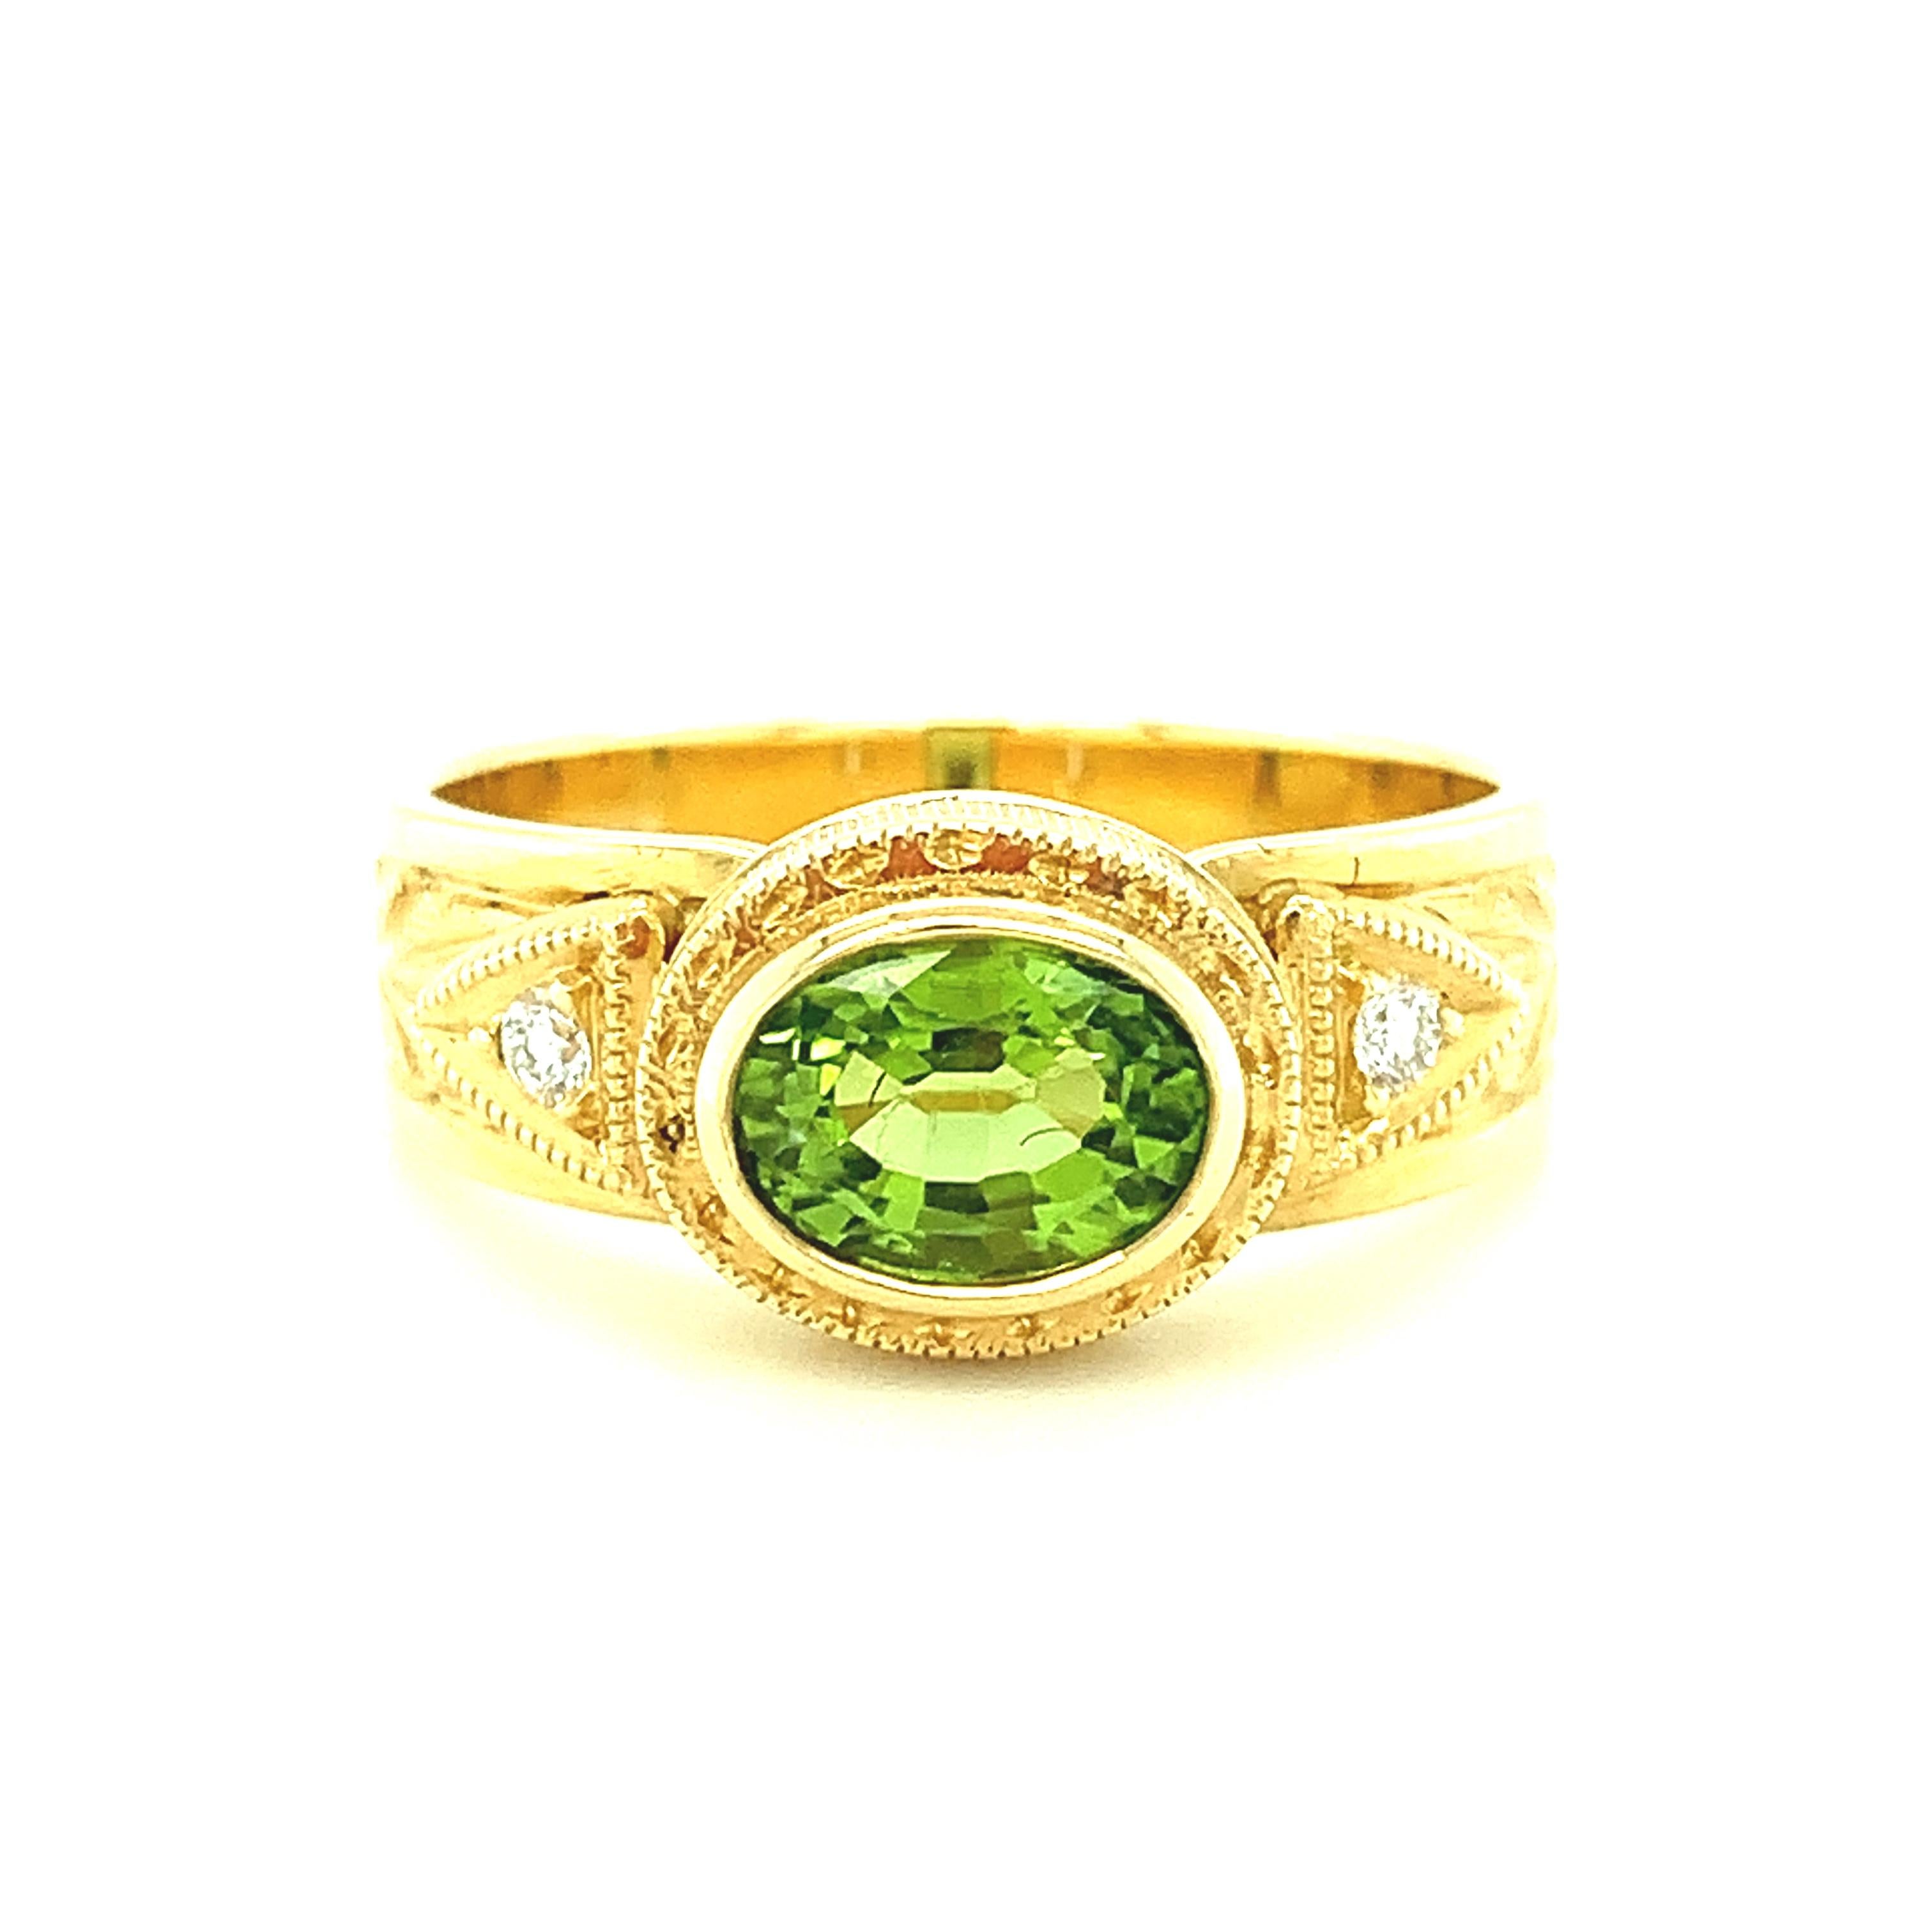 This pretty ring features a very bright, sparkling peridot that has been set in an intricately handmade 18k yellow gold bezel. The oval peridot has exceptional brilliance and is accented by two sparkling, round brilliant white diamonds. The sides of